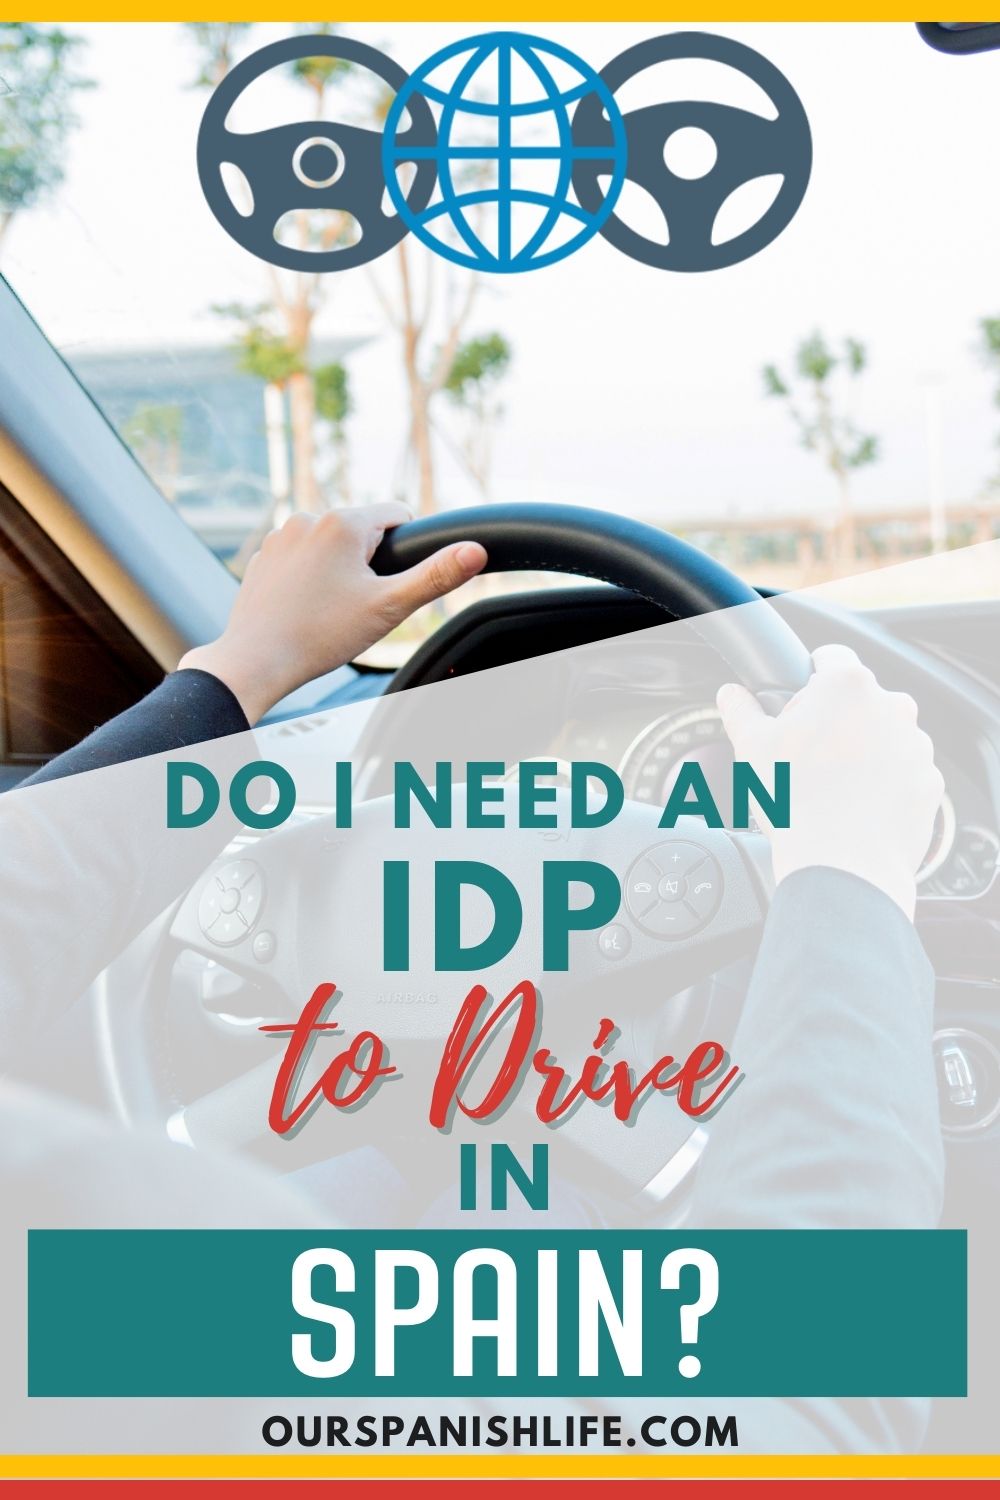 Photo showing a person driving a vehicle, a logo of IDP and test overlays that read Do I Need an IDP to Drive in Spain